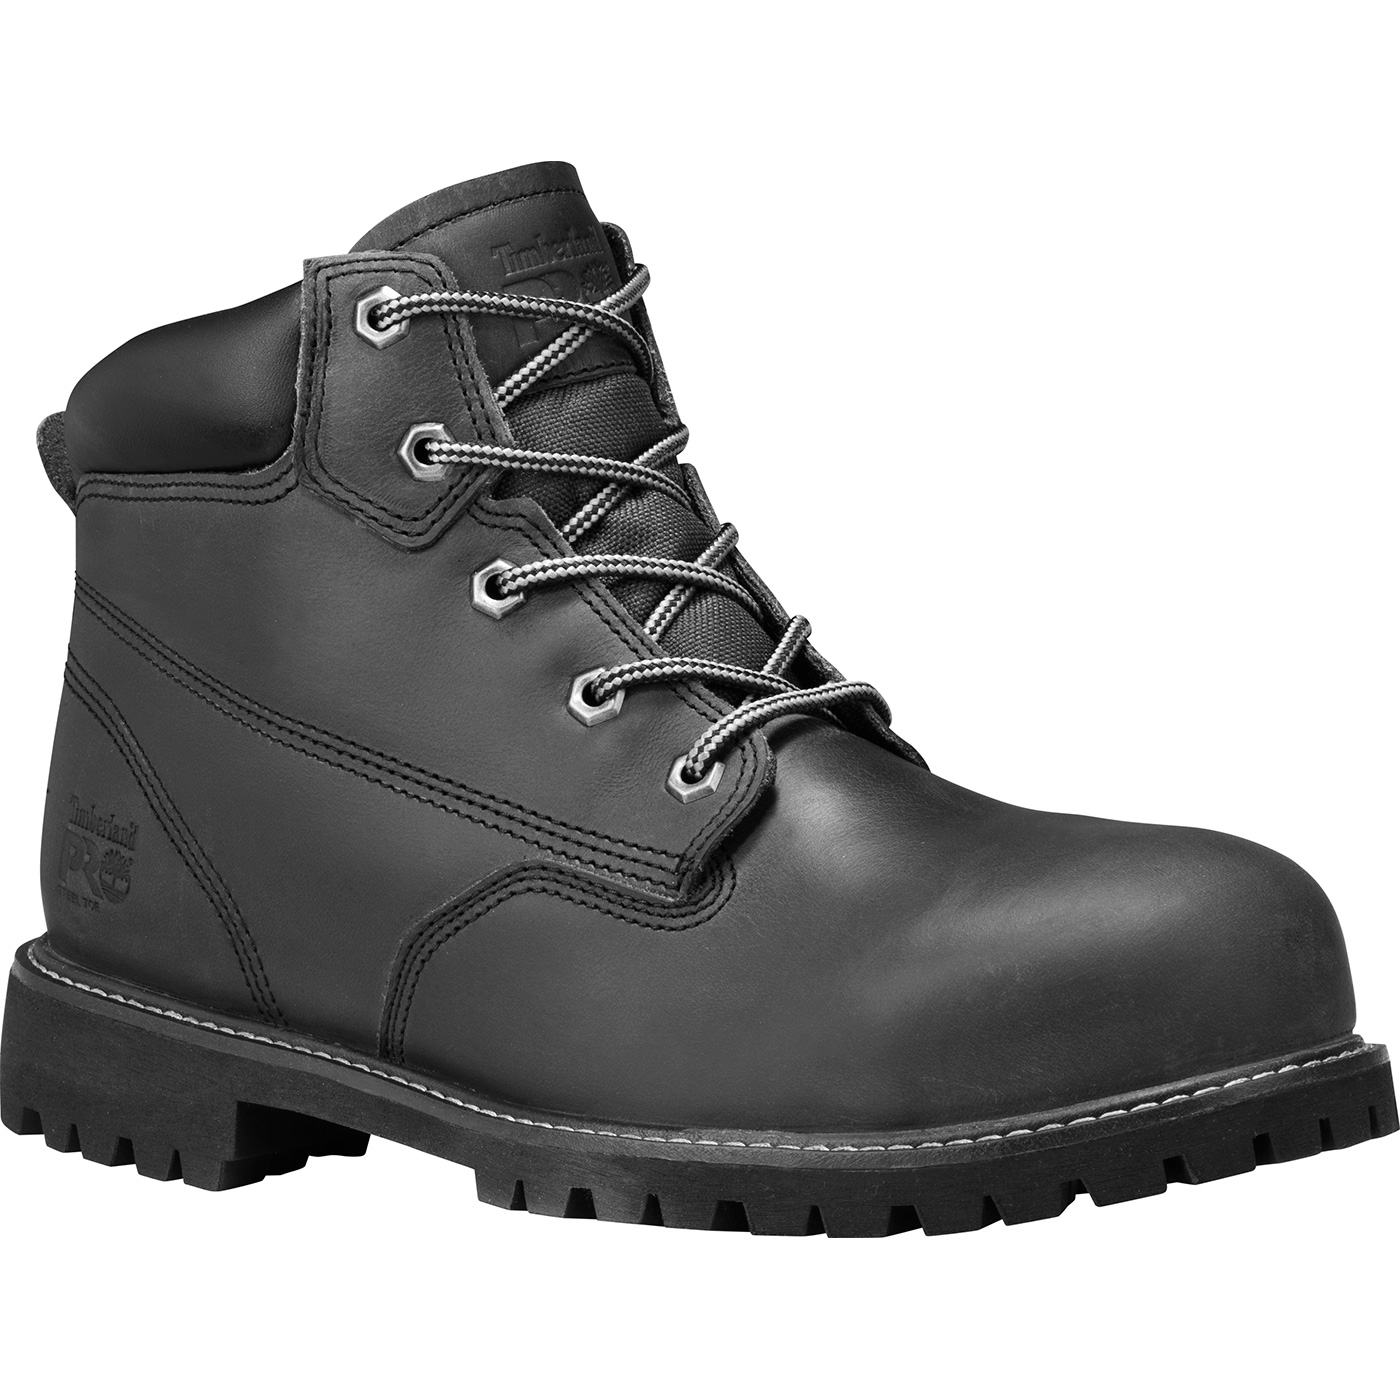 Buy the Timberland PRO Gritstone Men's 6 inch Steel Toe Electrical ...